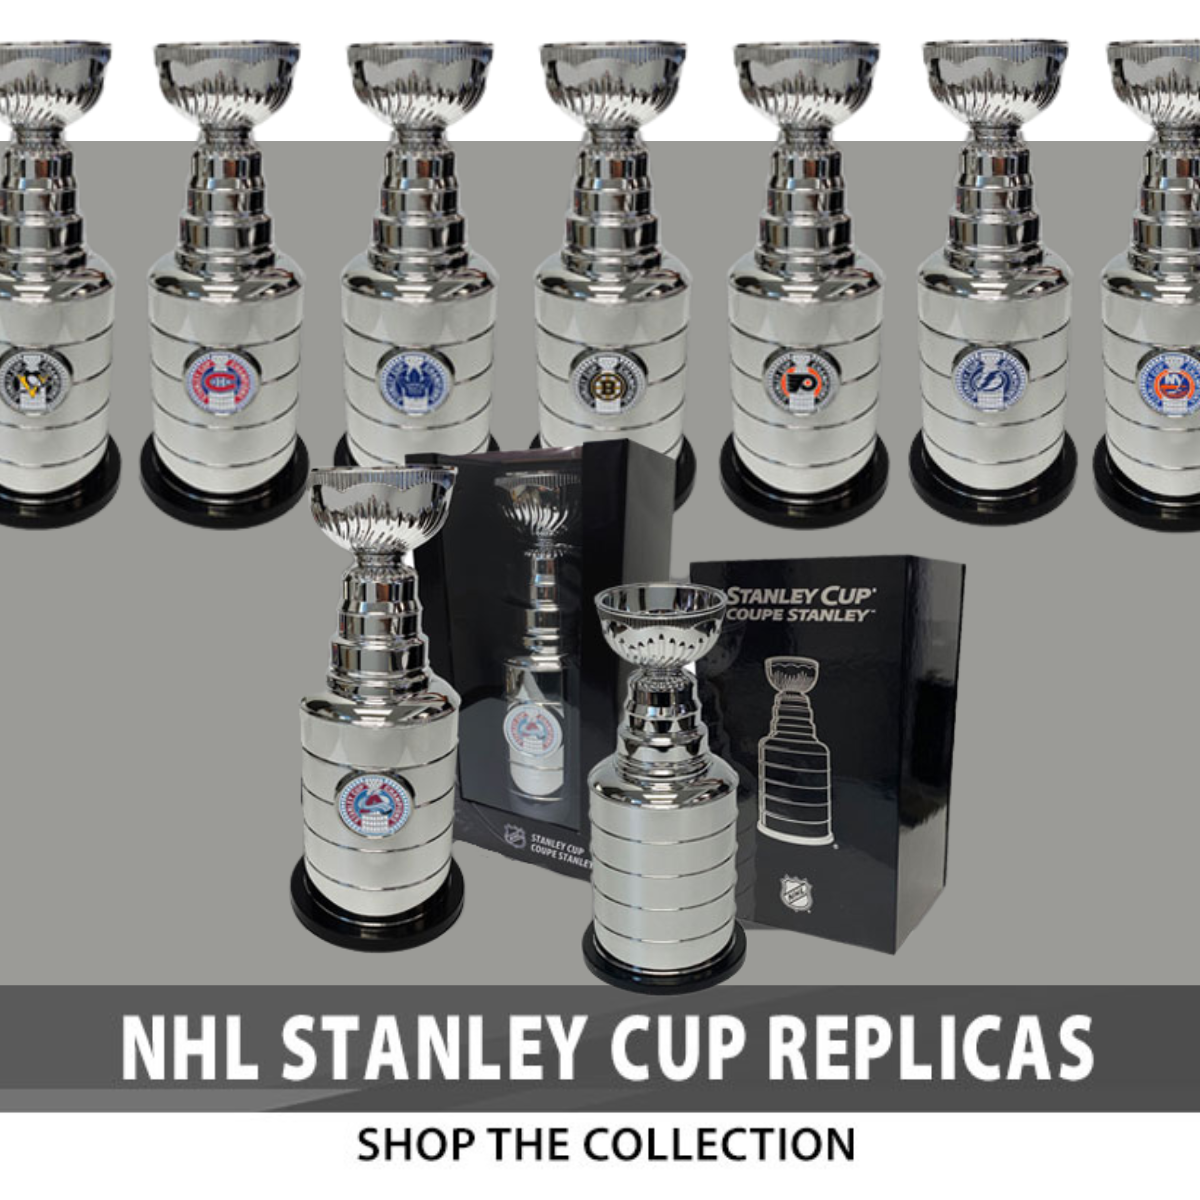 Hockey Hall of Fame - Stanley Cup Journals: 39